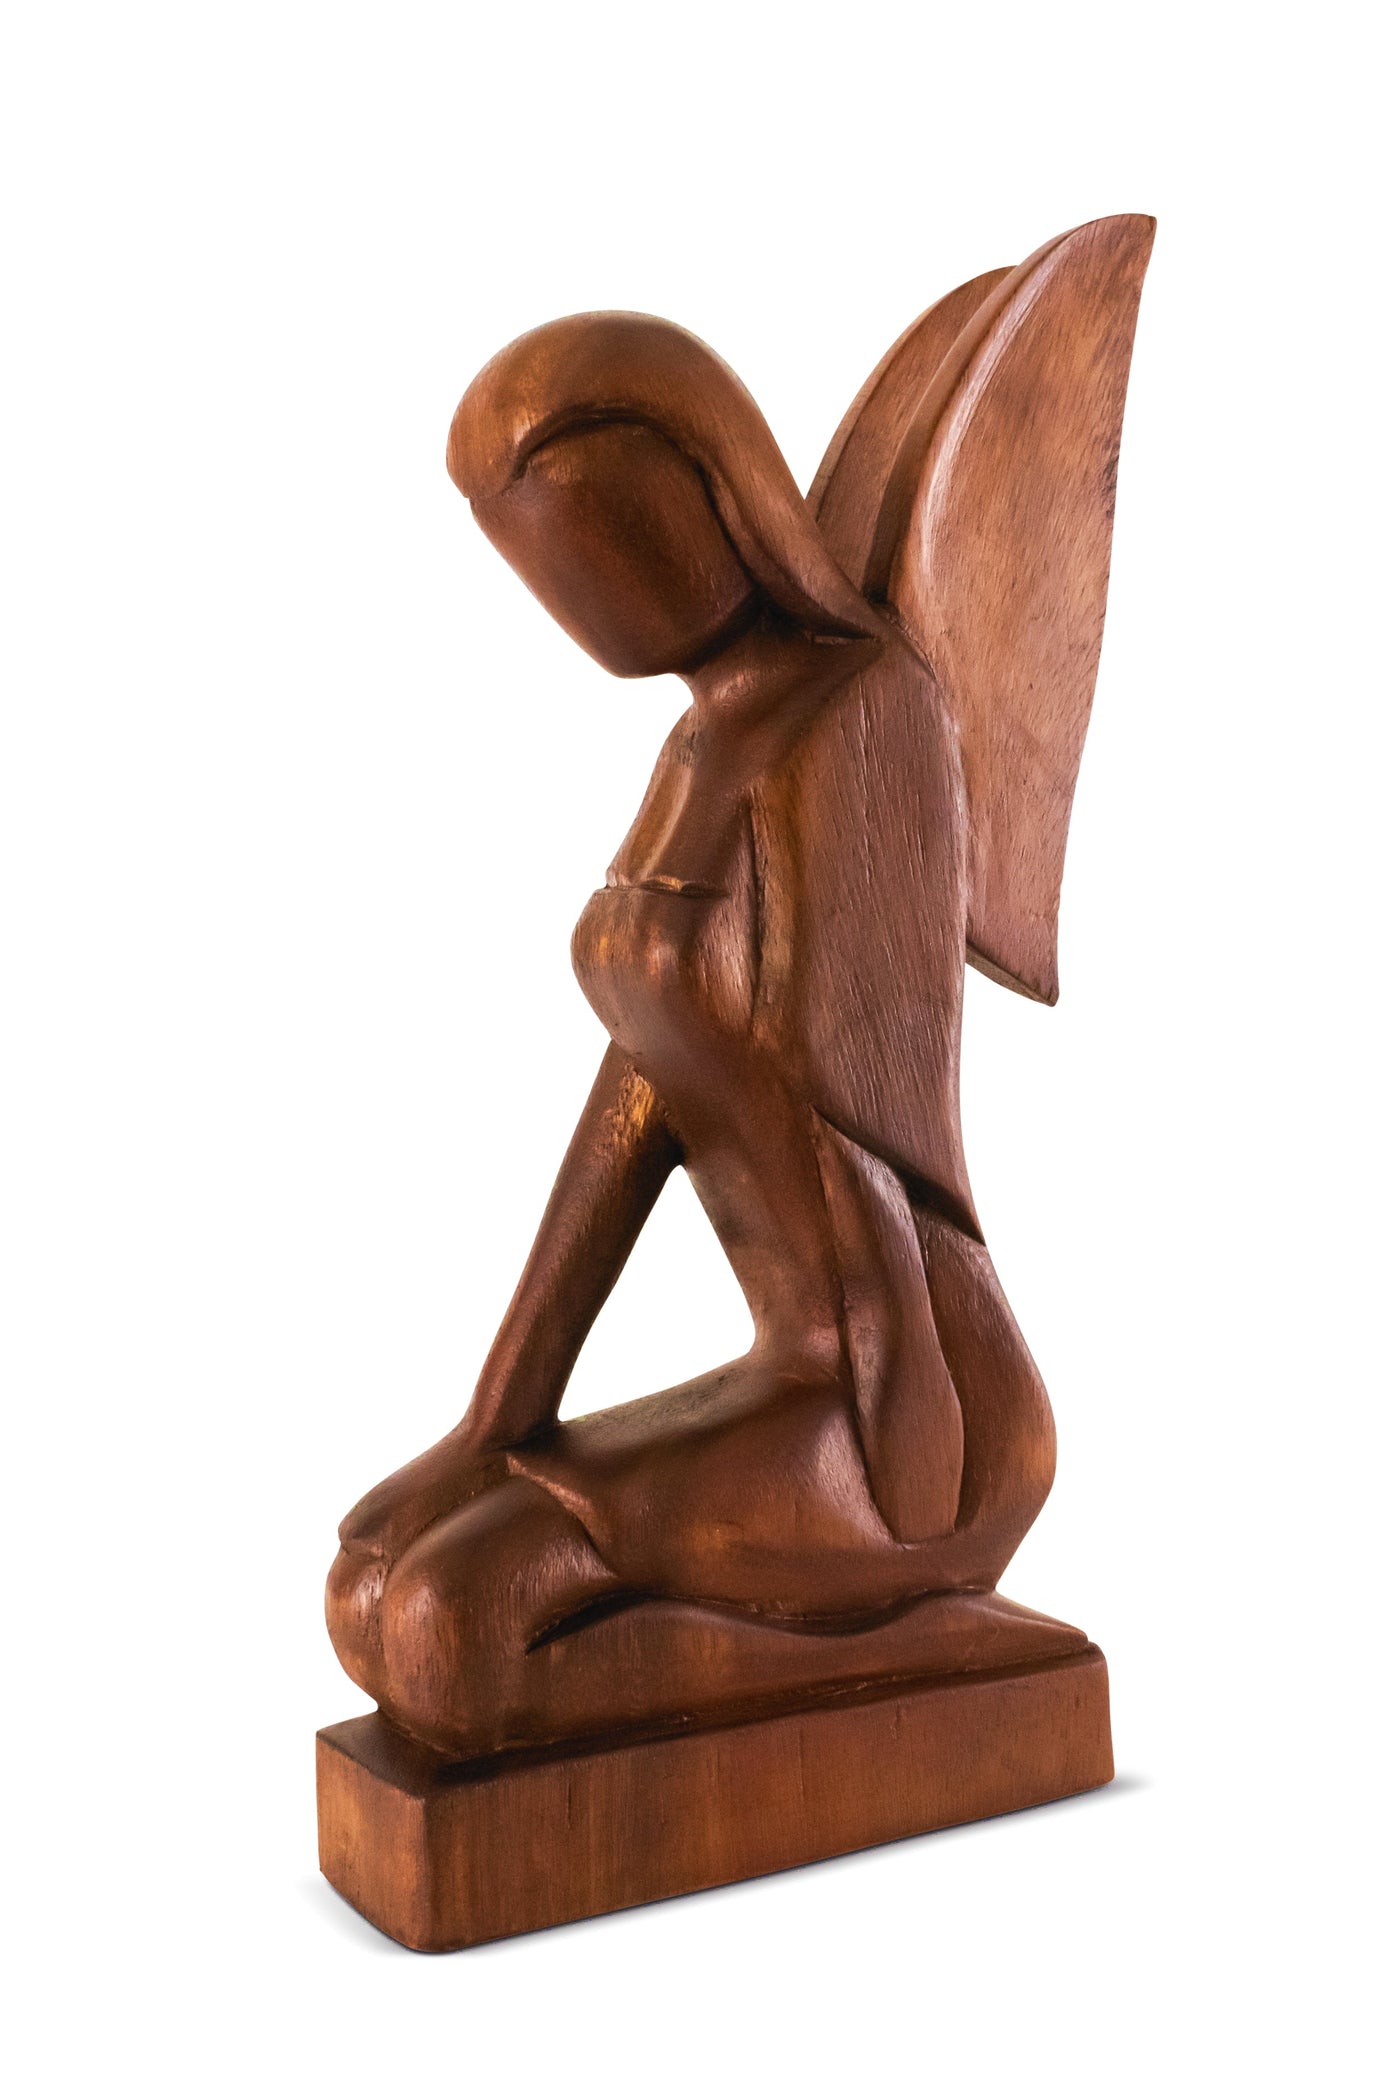 12" Wooden Handmade Abstract Sculpture Statue Handcrafted "Kneeling Angel" Gift Decorative Home Decor Figurine Accent Decoration Artwork Hand Carved